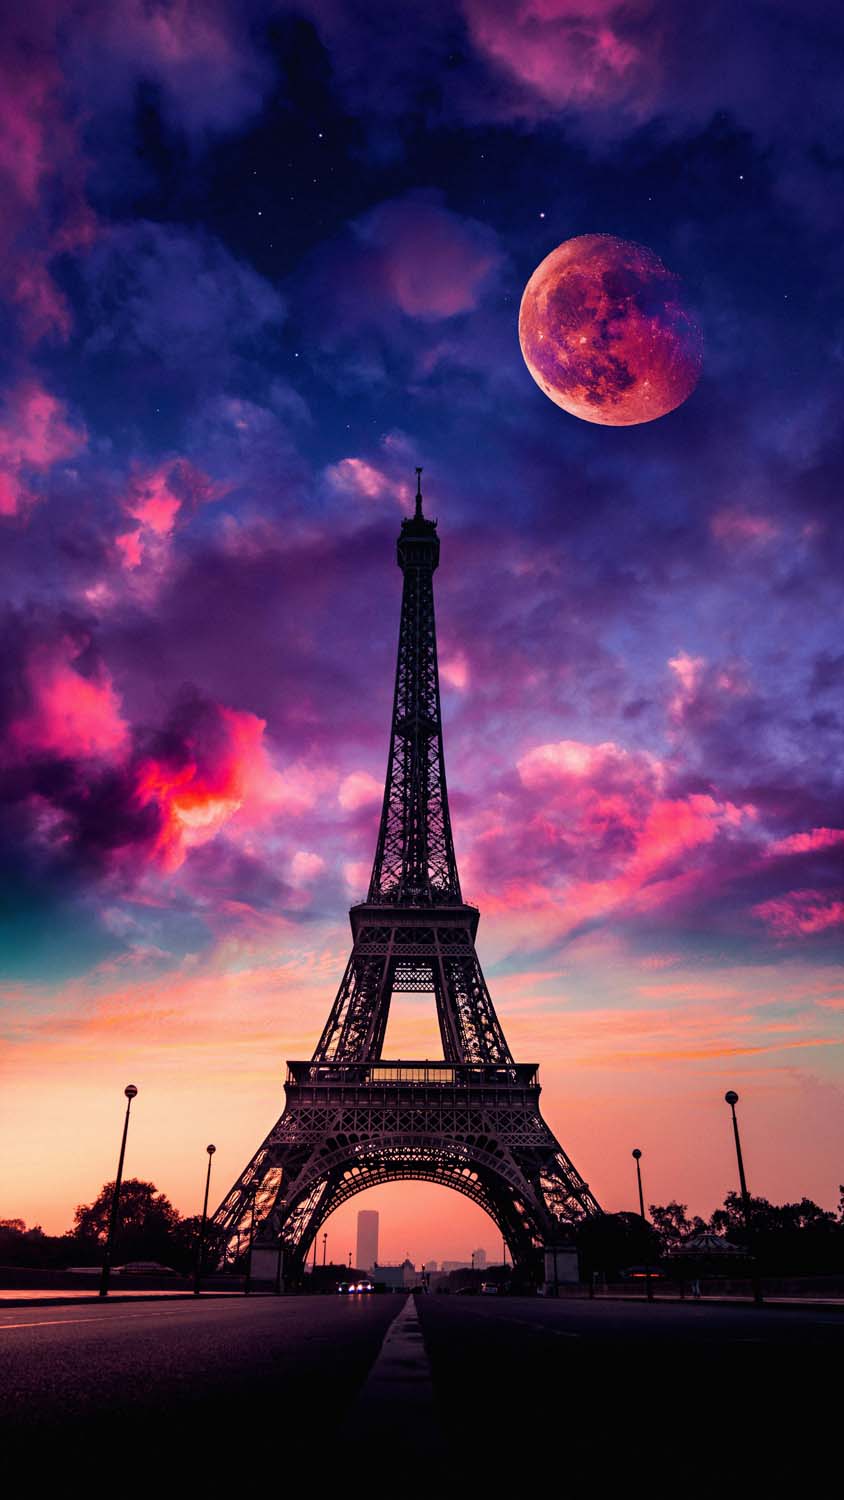 Eiffel Tower And Moon IPhone Wallpaper HD - IPhone Wallpapers : iPhone  Wallpapers